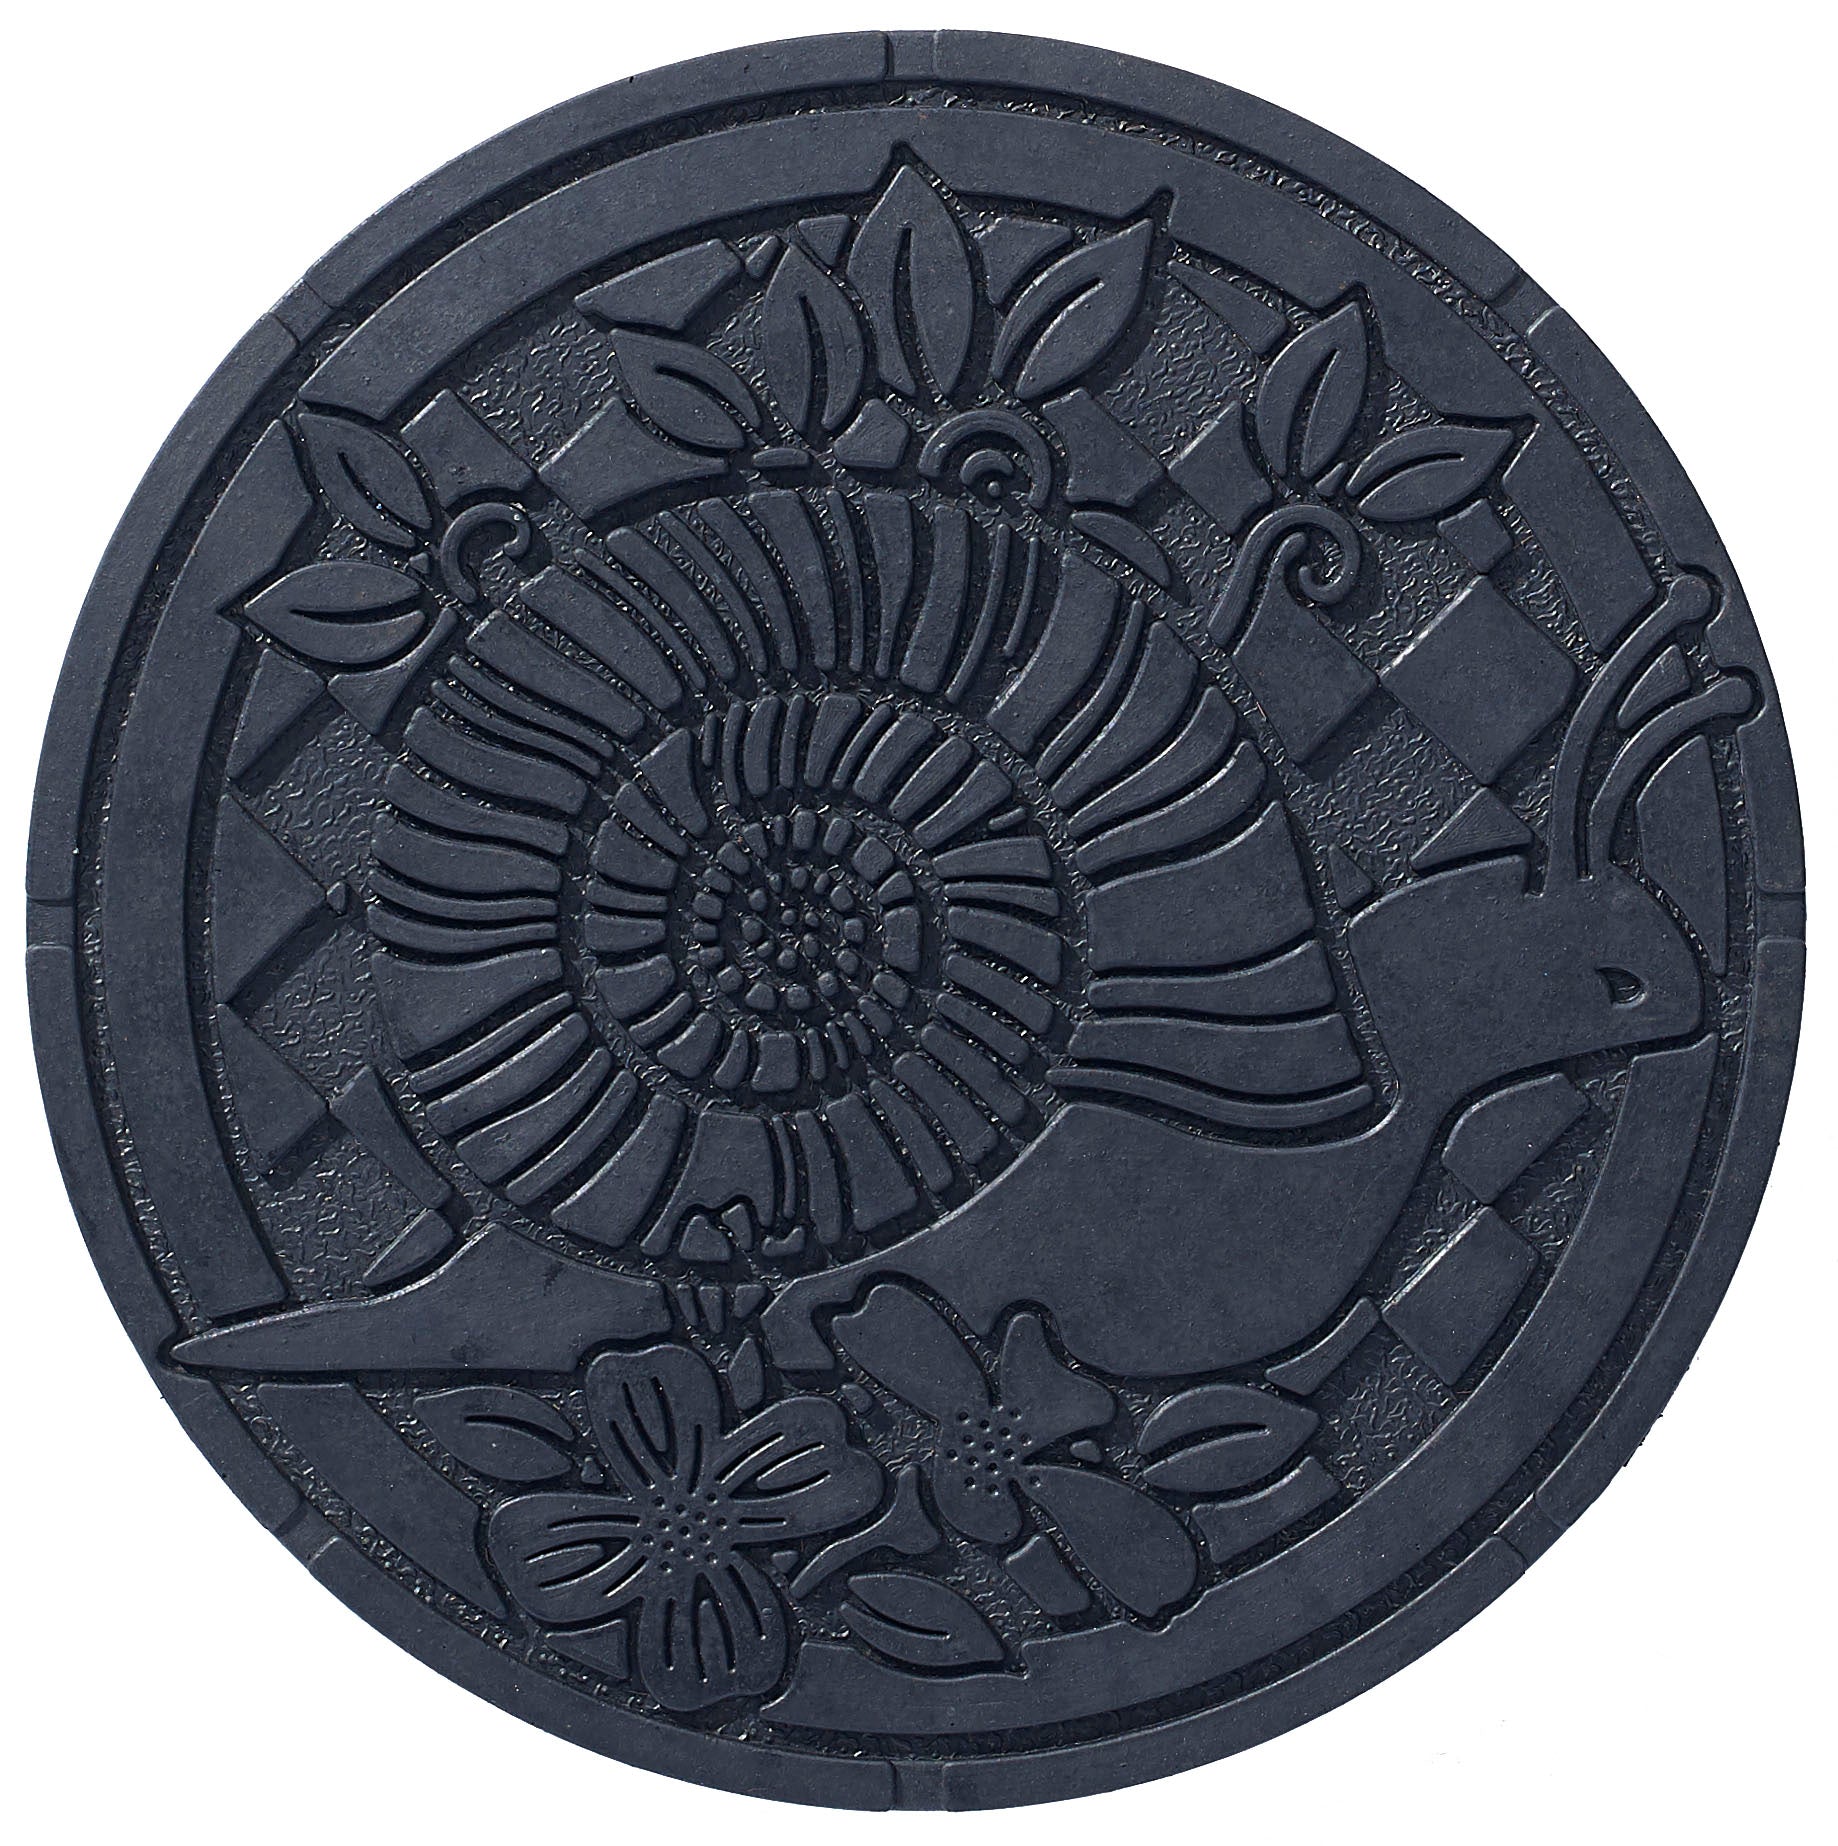 Snail Deluxe Stepping Stone (Set of 3)